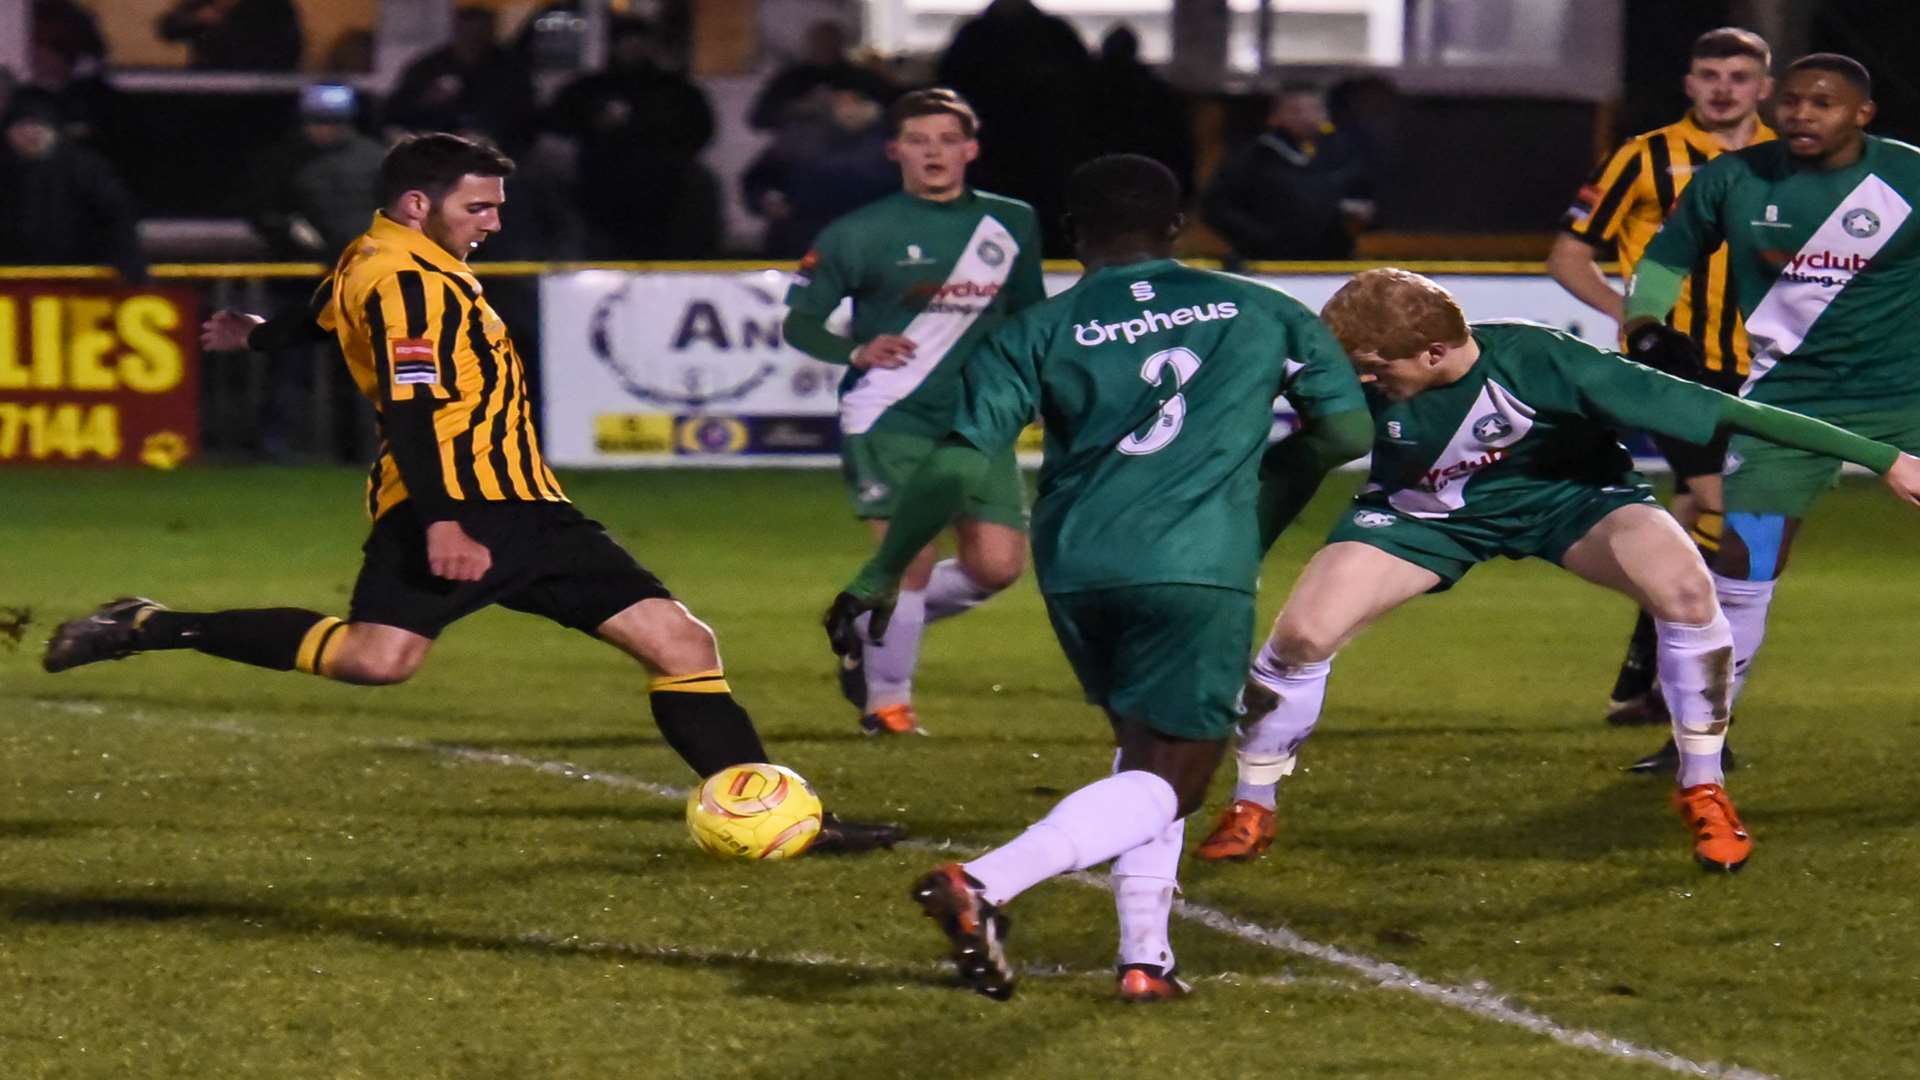 Folkestone's Ian Draycott pulls the trigger for a shot from the 18-yard line Picture: Alan Langley